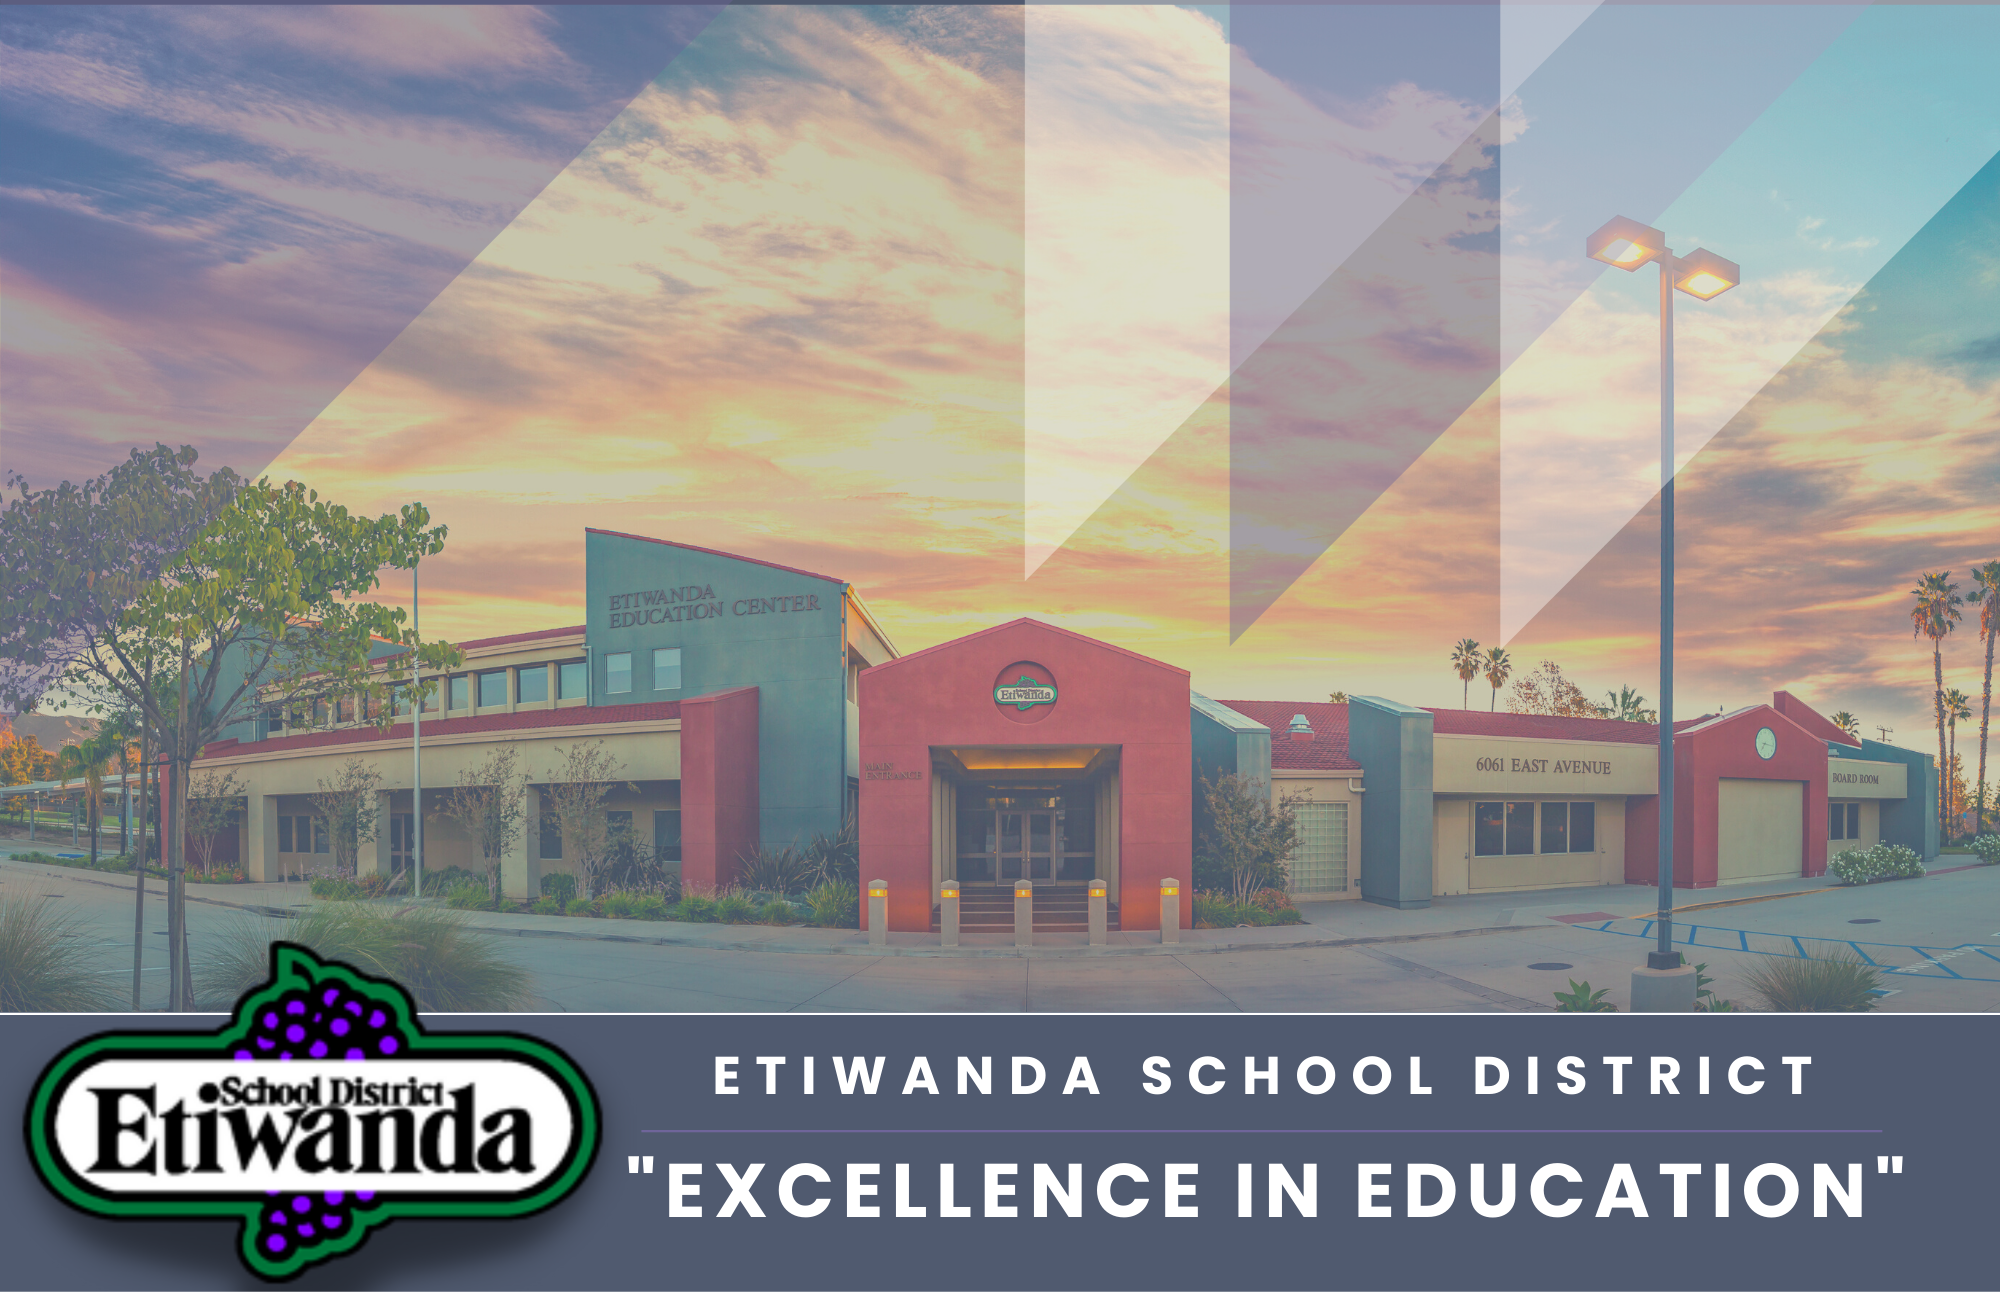 Etiwanda School District "Excellence in Education"